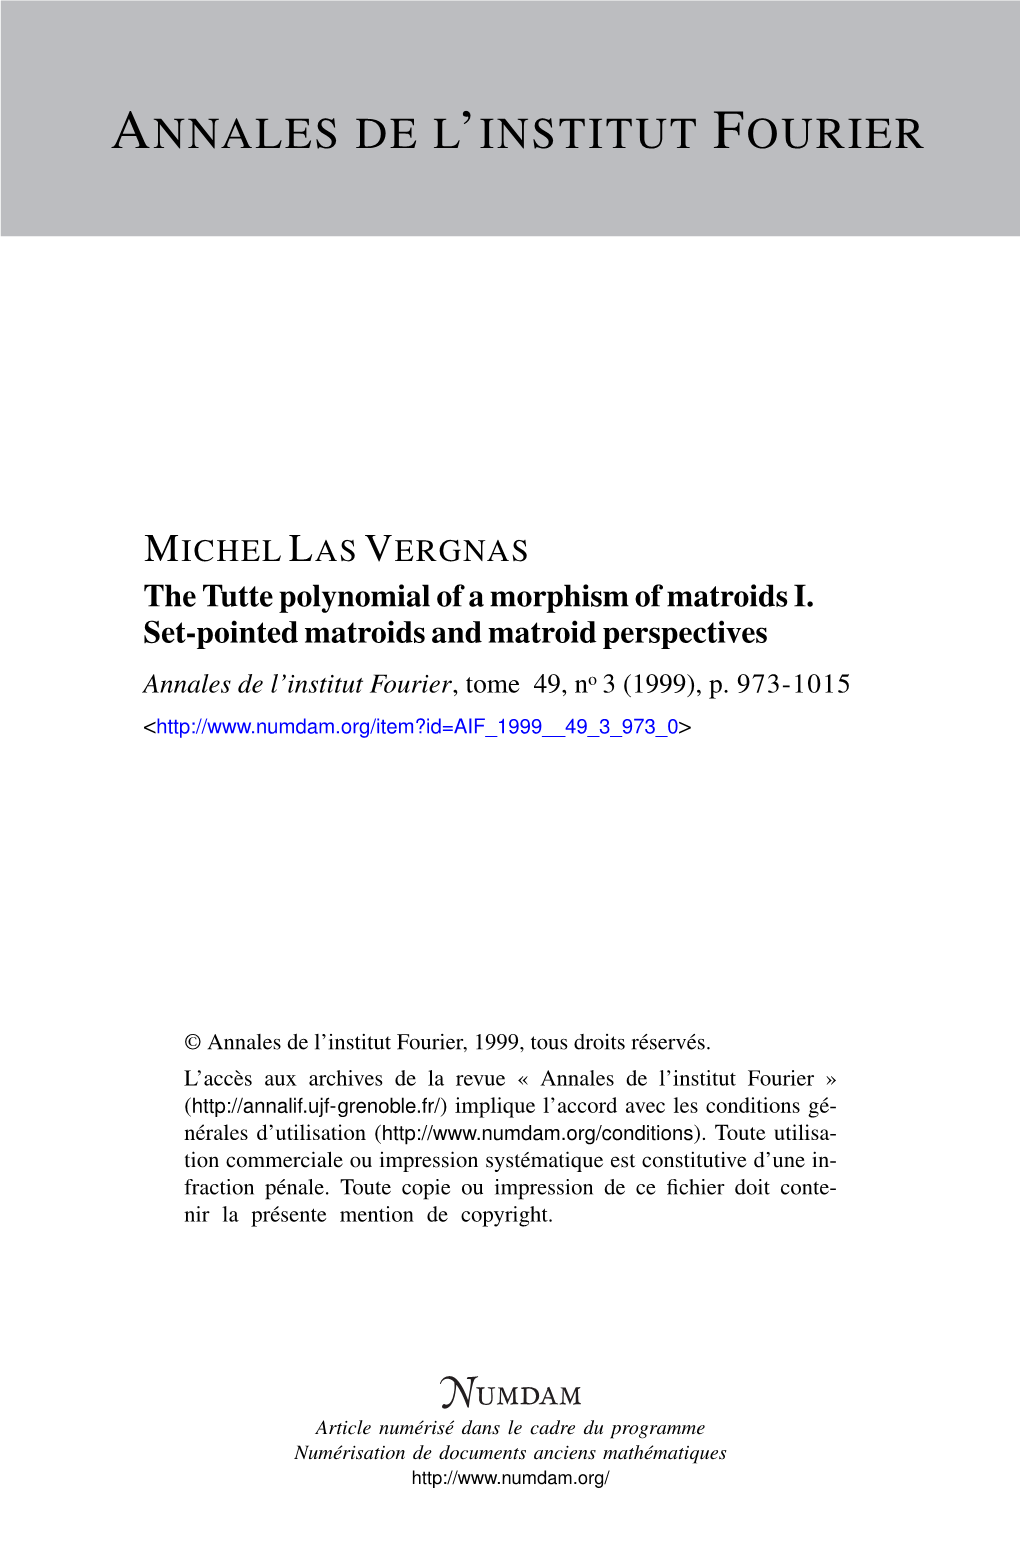 The Tutte Polynomial of a Morphism of Matroids I. Set-Pointed Matroids and Matroid Perspectives Annales De L’Institut Fourier, Tome 49, No 3 (1999), P